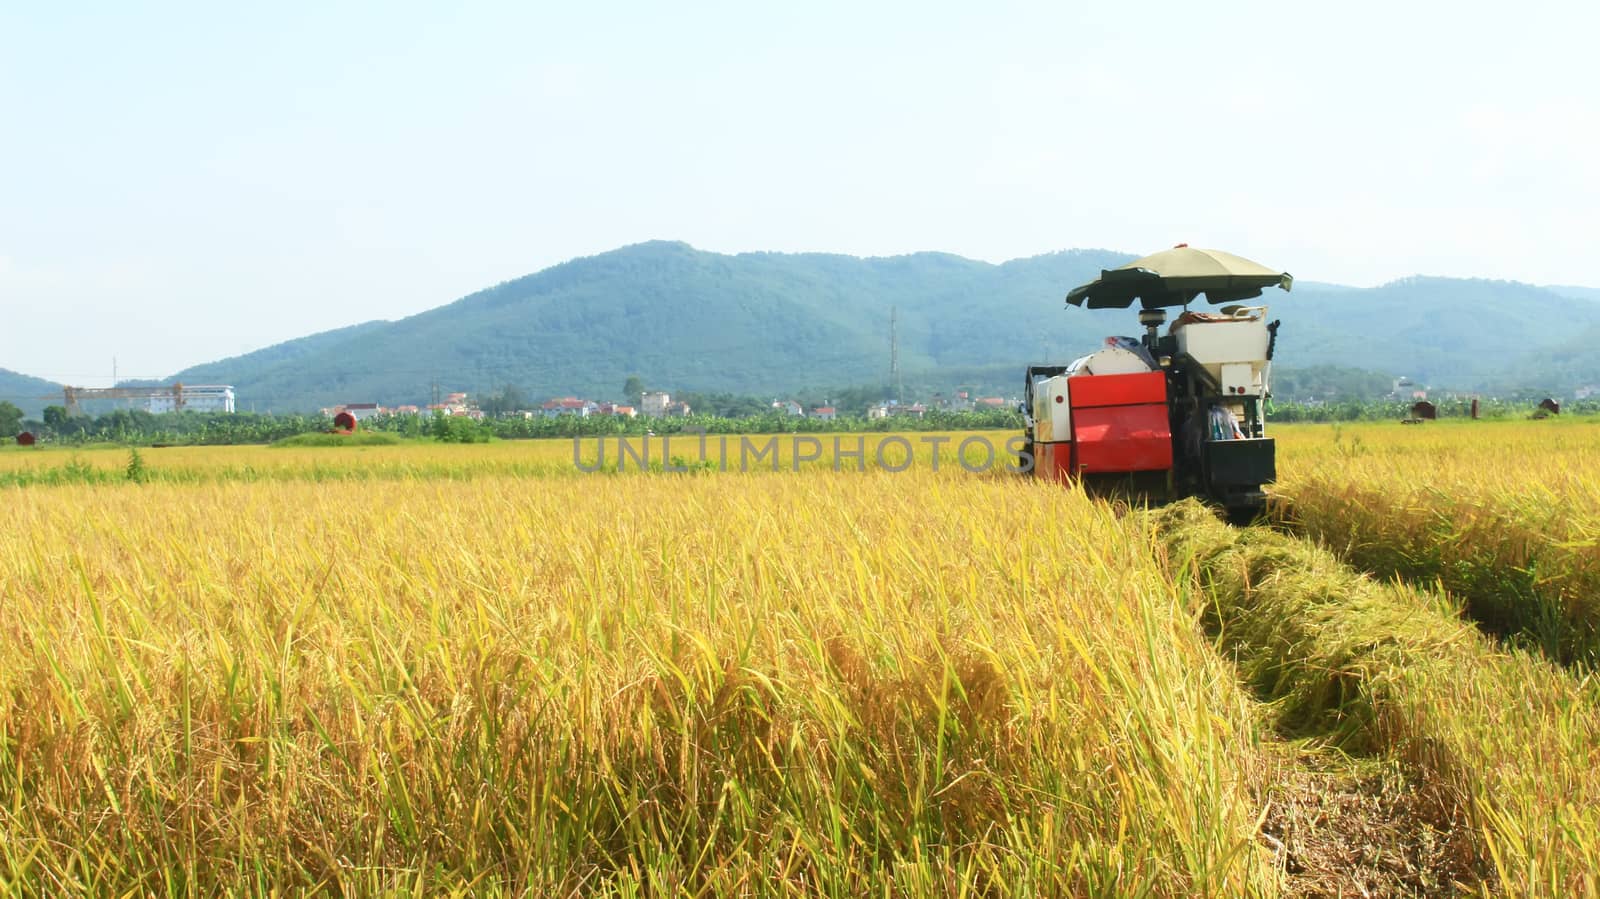 farmers harvesting rice in the fields by machine  by dinhngochung